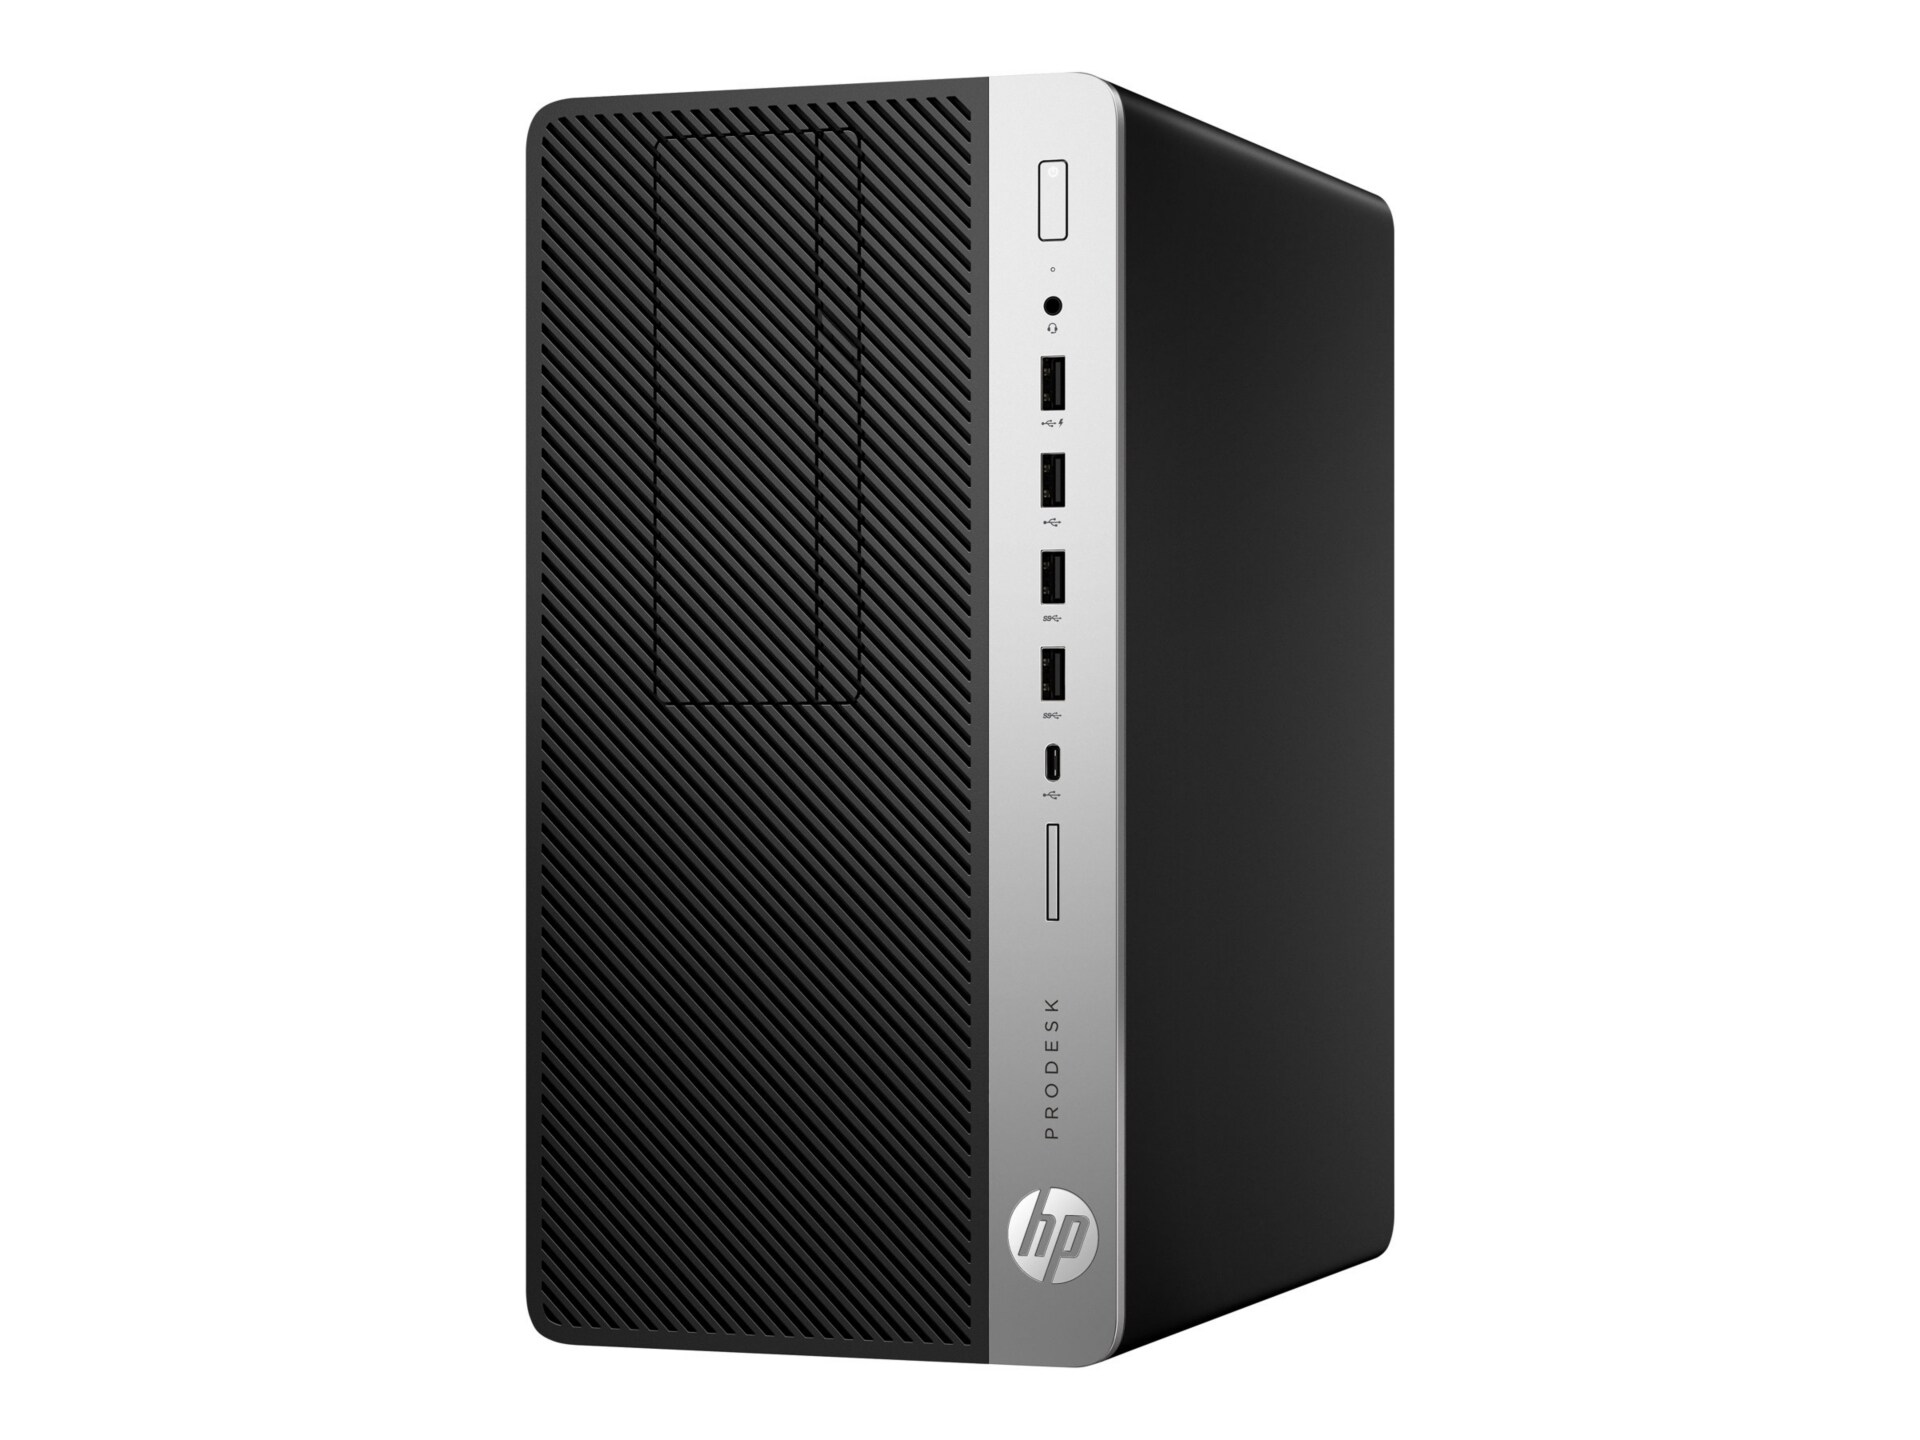 HP ProDesk 600 G3 - micro tower - Core i7 7700 3.6 GHz - 16 GB - 512 GB - US